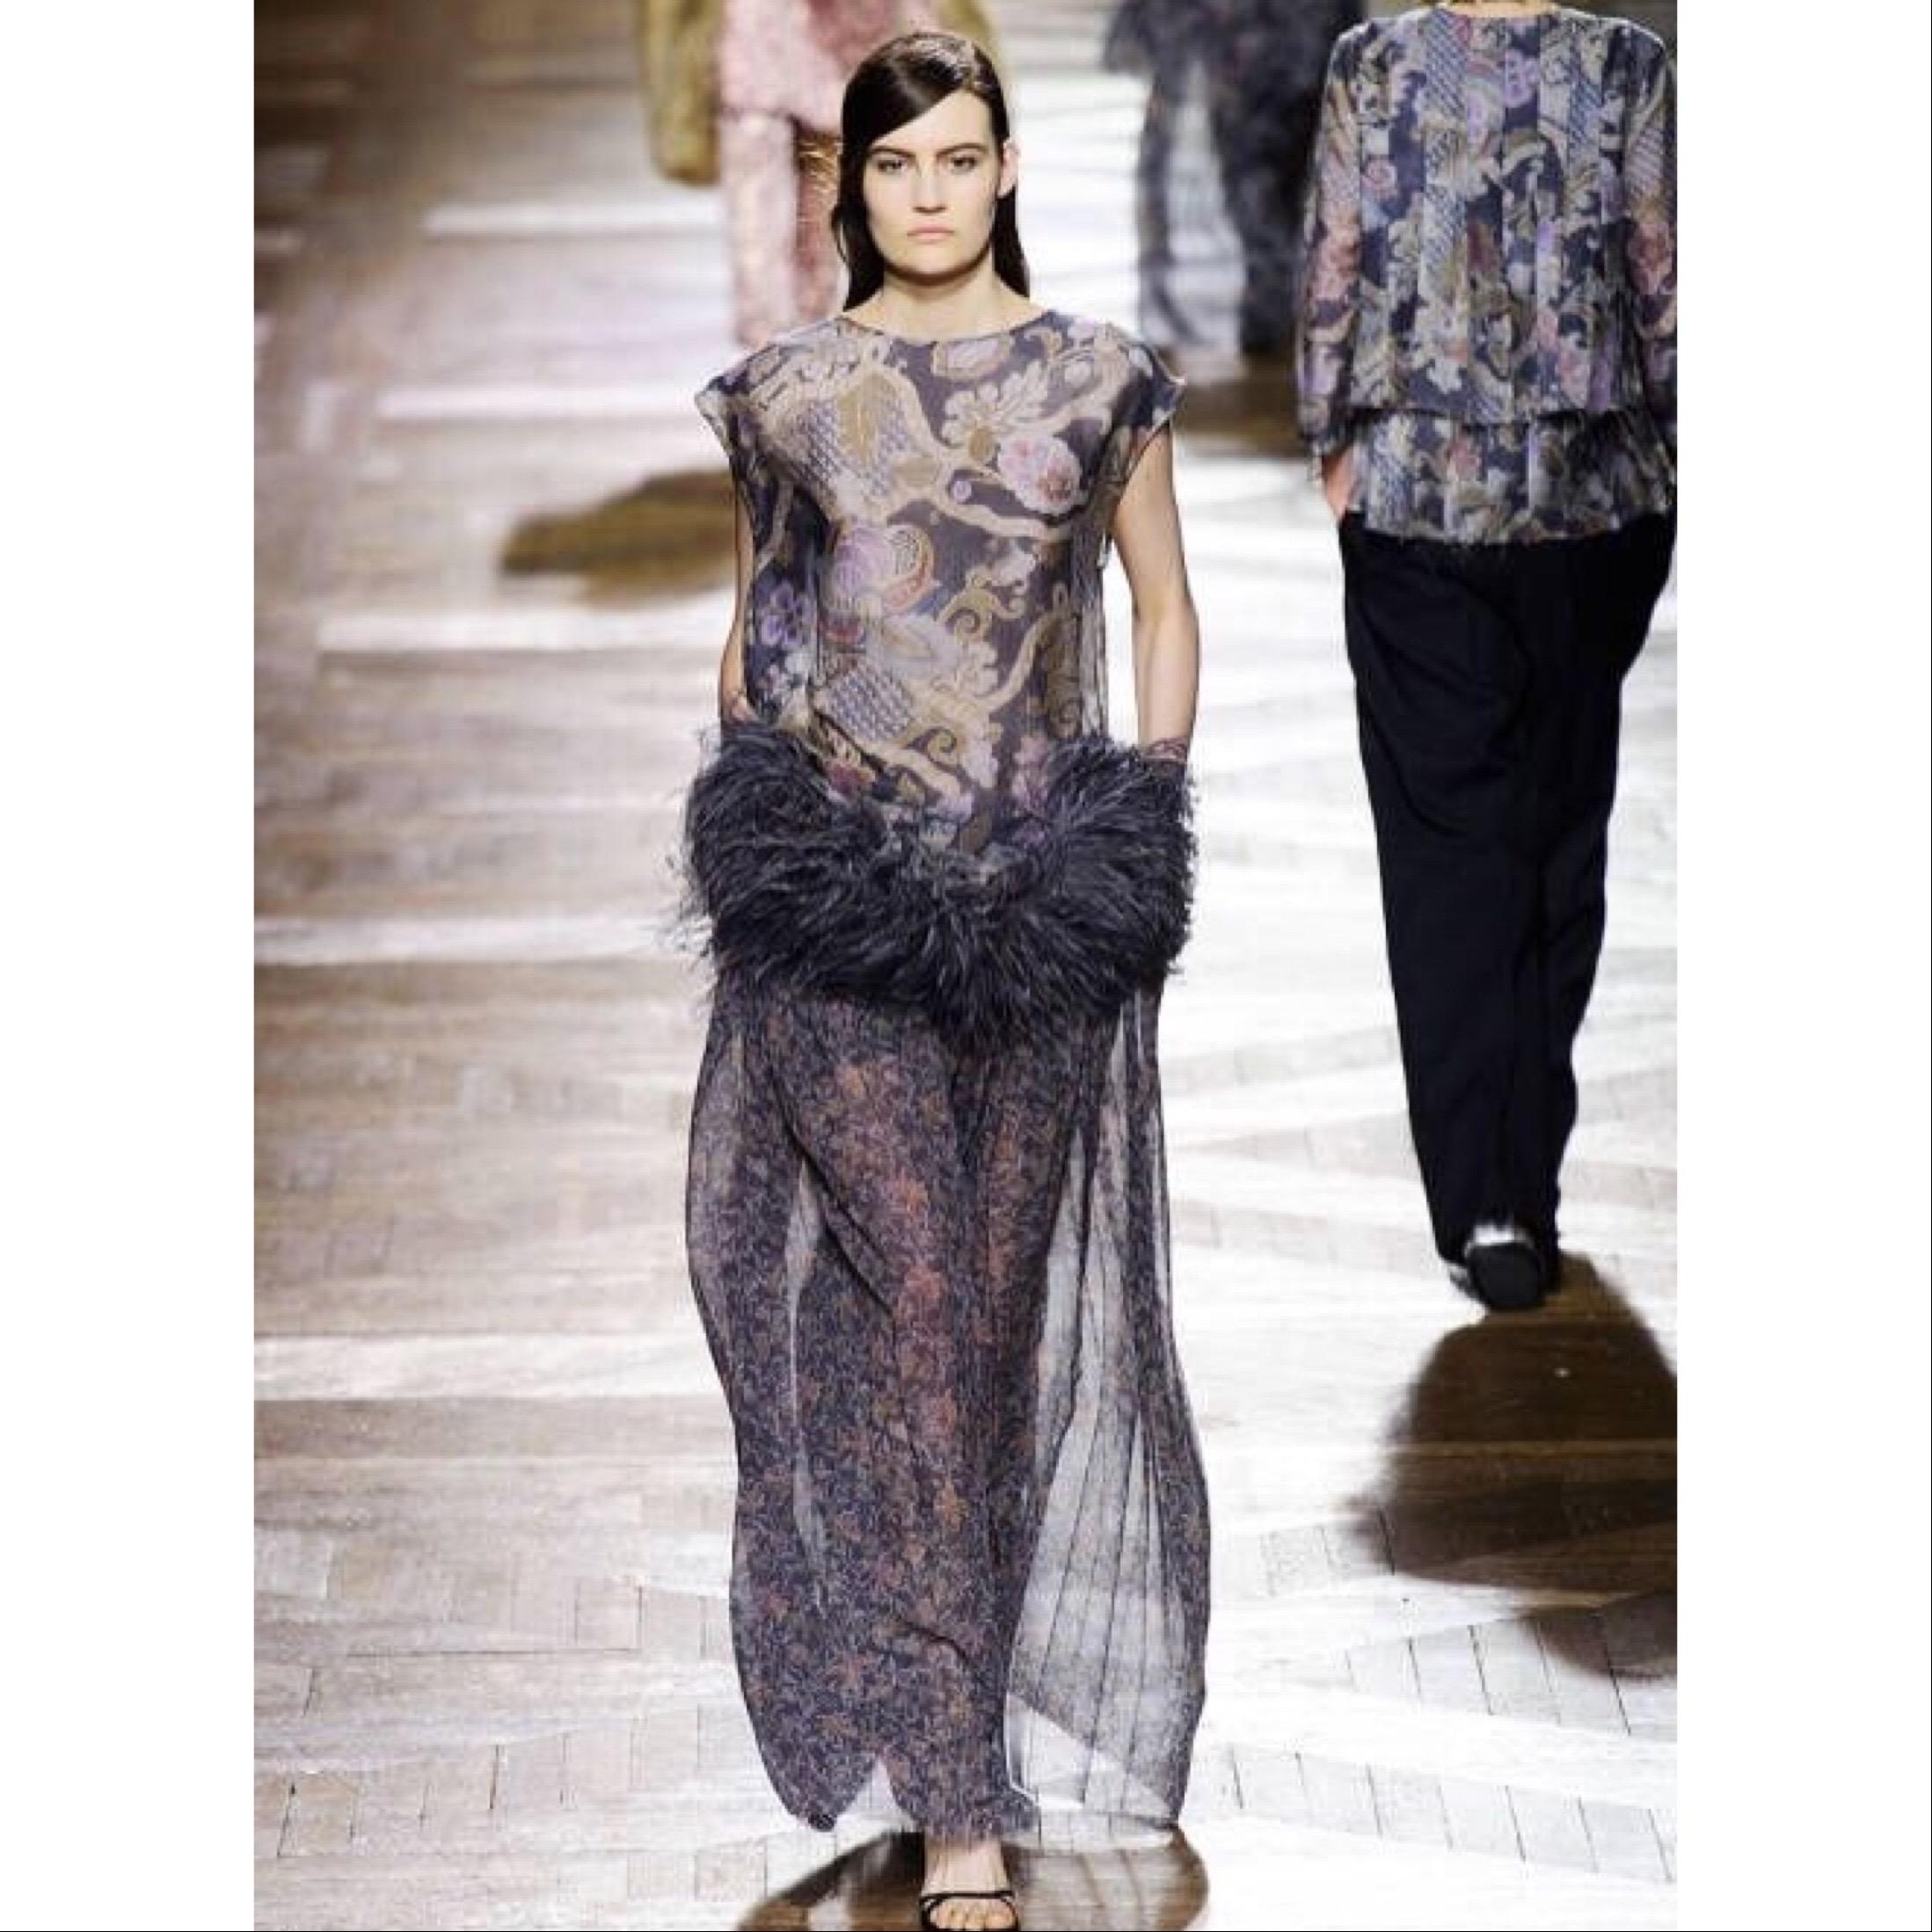 A member of the iconic Antwerp Six collective, Dries van Noten’s vision of luxury ready-to-wear fashion is intertwined with themes of nature and textile innovation that often result in captivating or even poetic ensembles that reshape notions of the